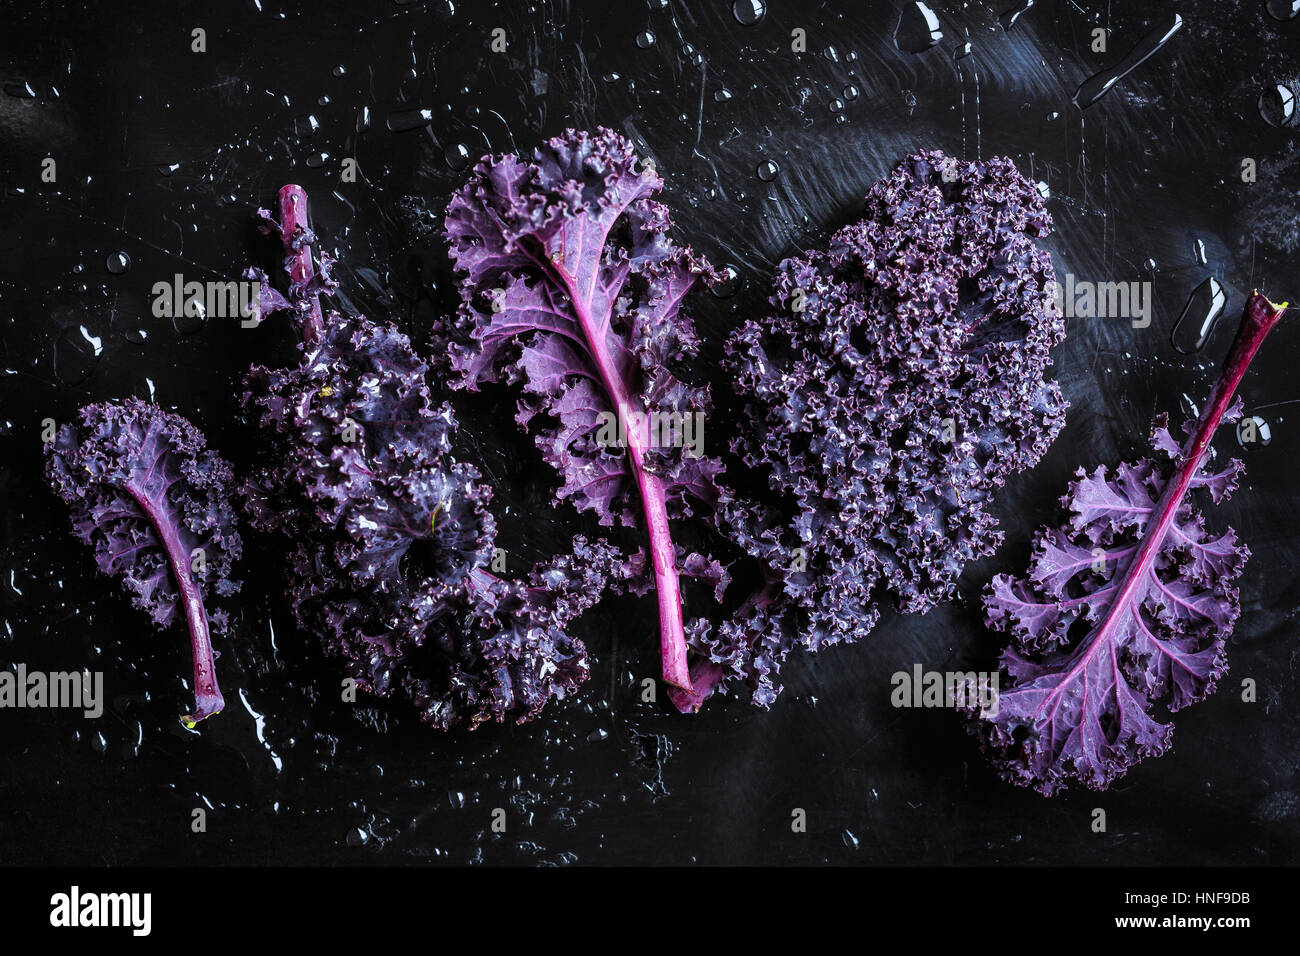 Red kale on black background Stock Photo